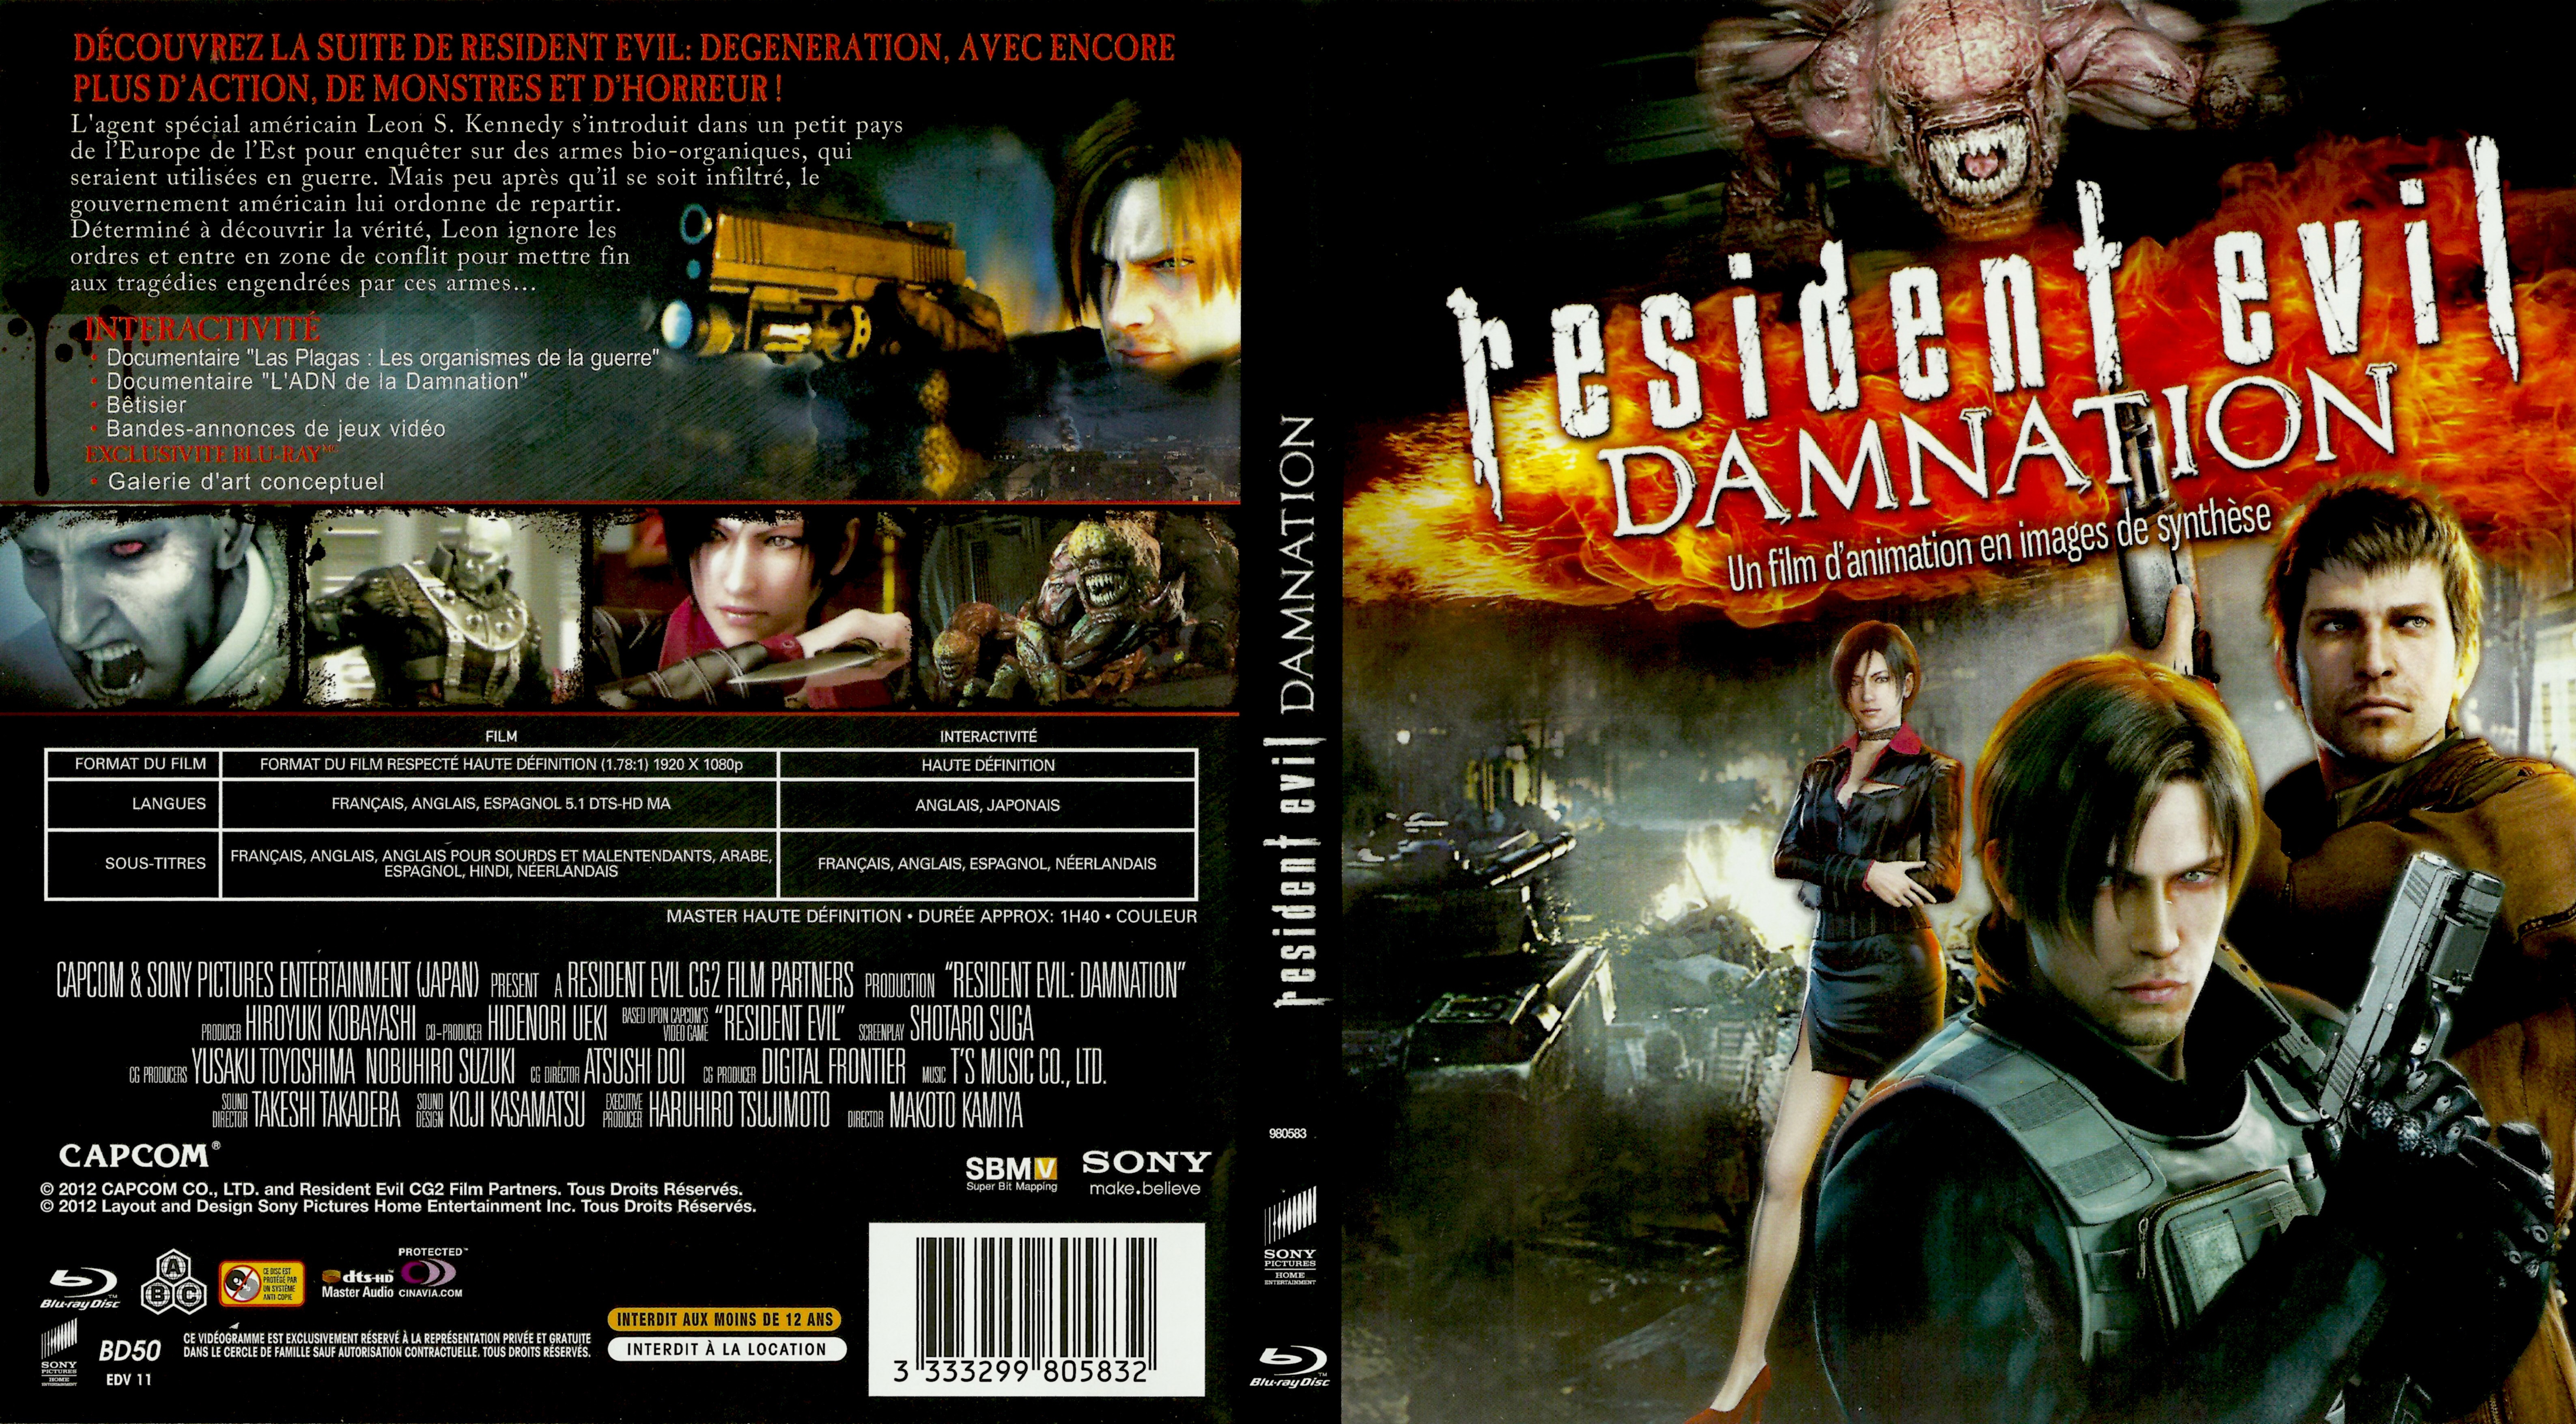 Jaquette DVD Resident Evil Damnation (BLU-RAY)